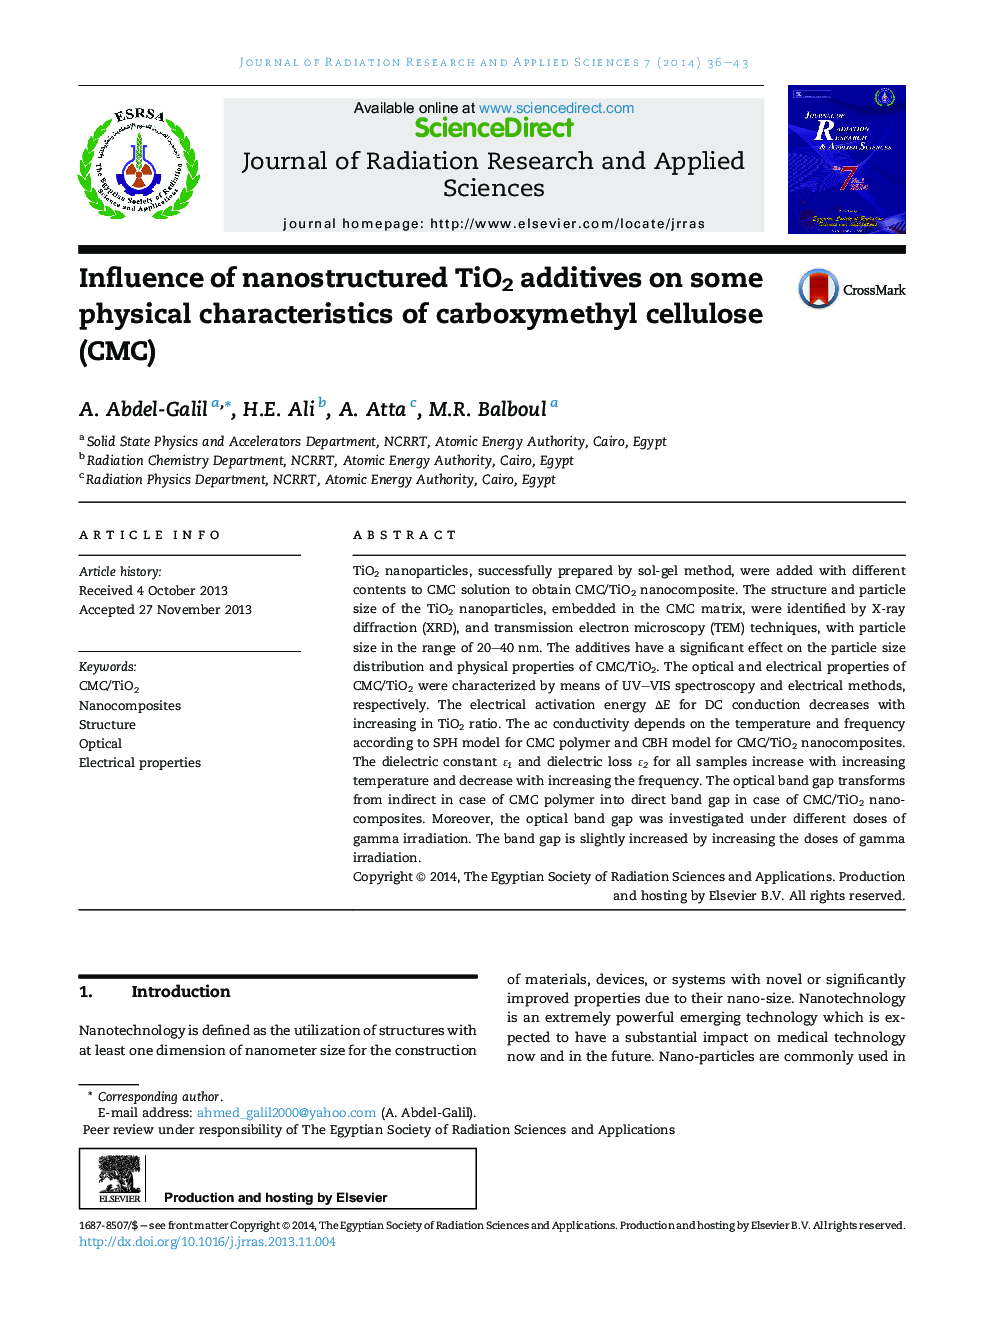 Influence of nanostructured TiO2 additives on some physical characteristics of carboxymethyl cellulose (CMC) 